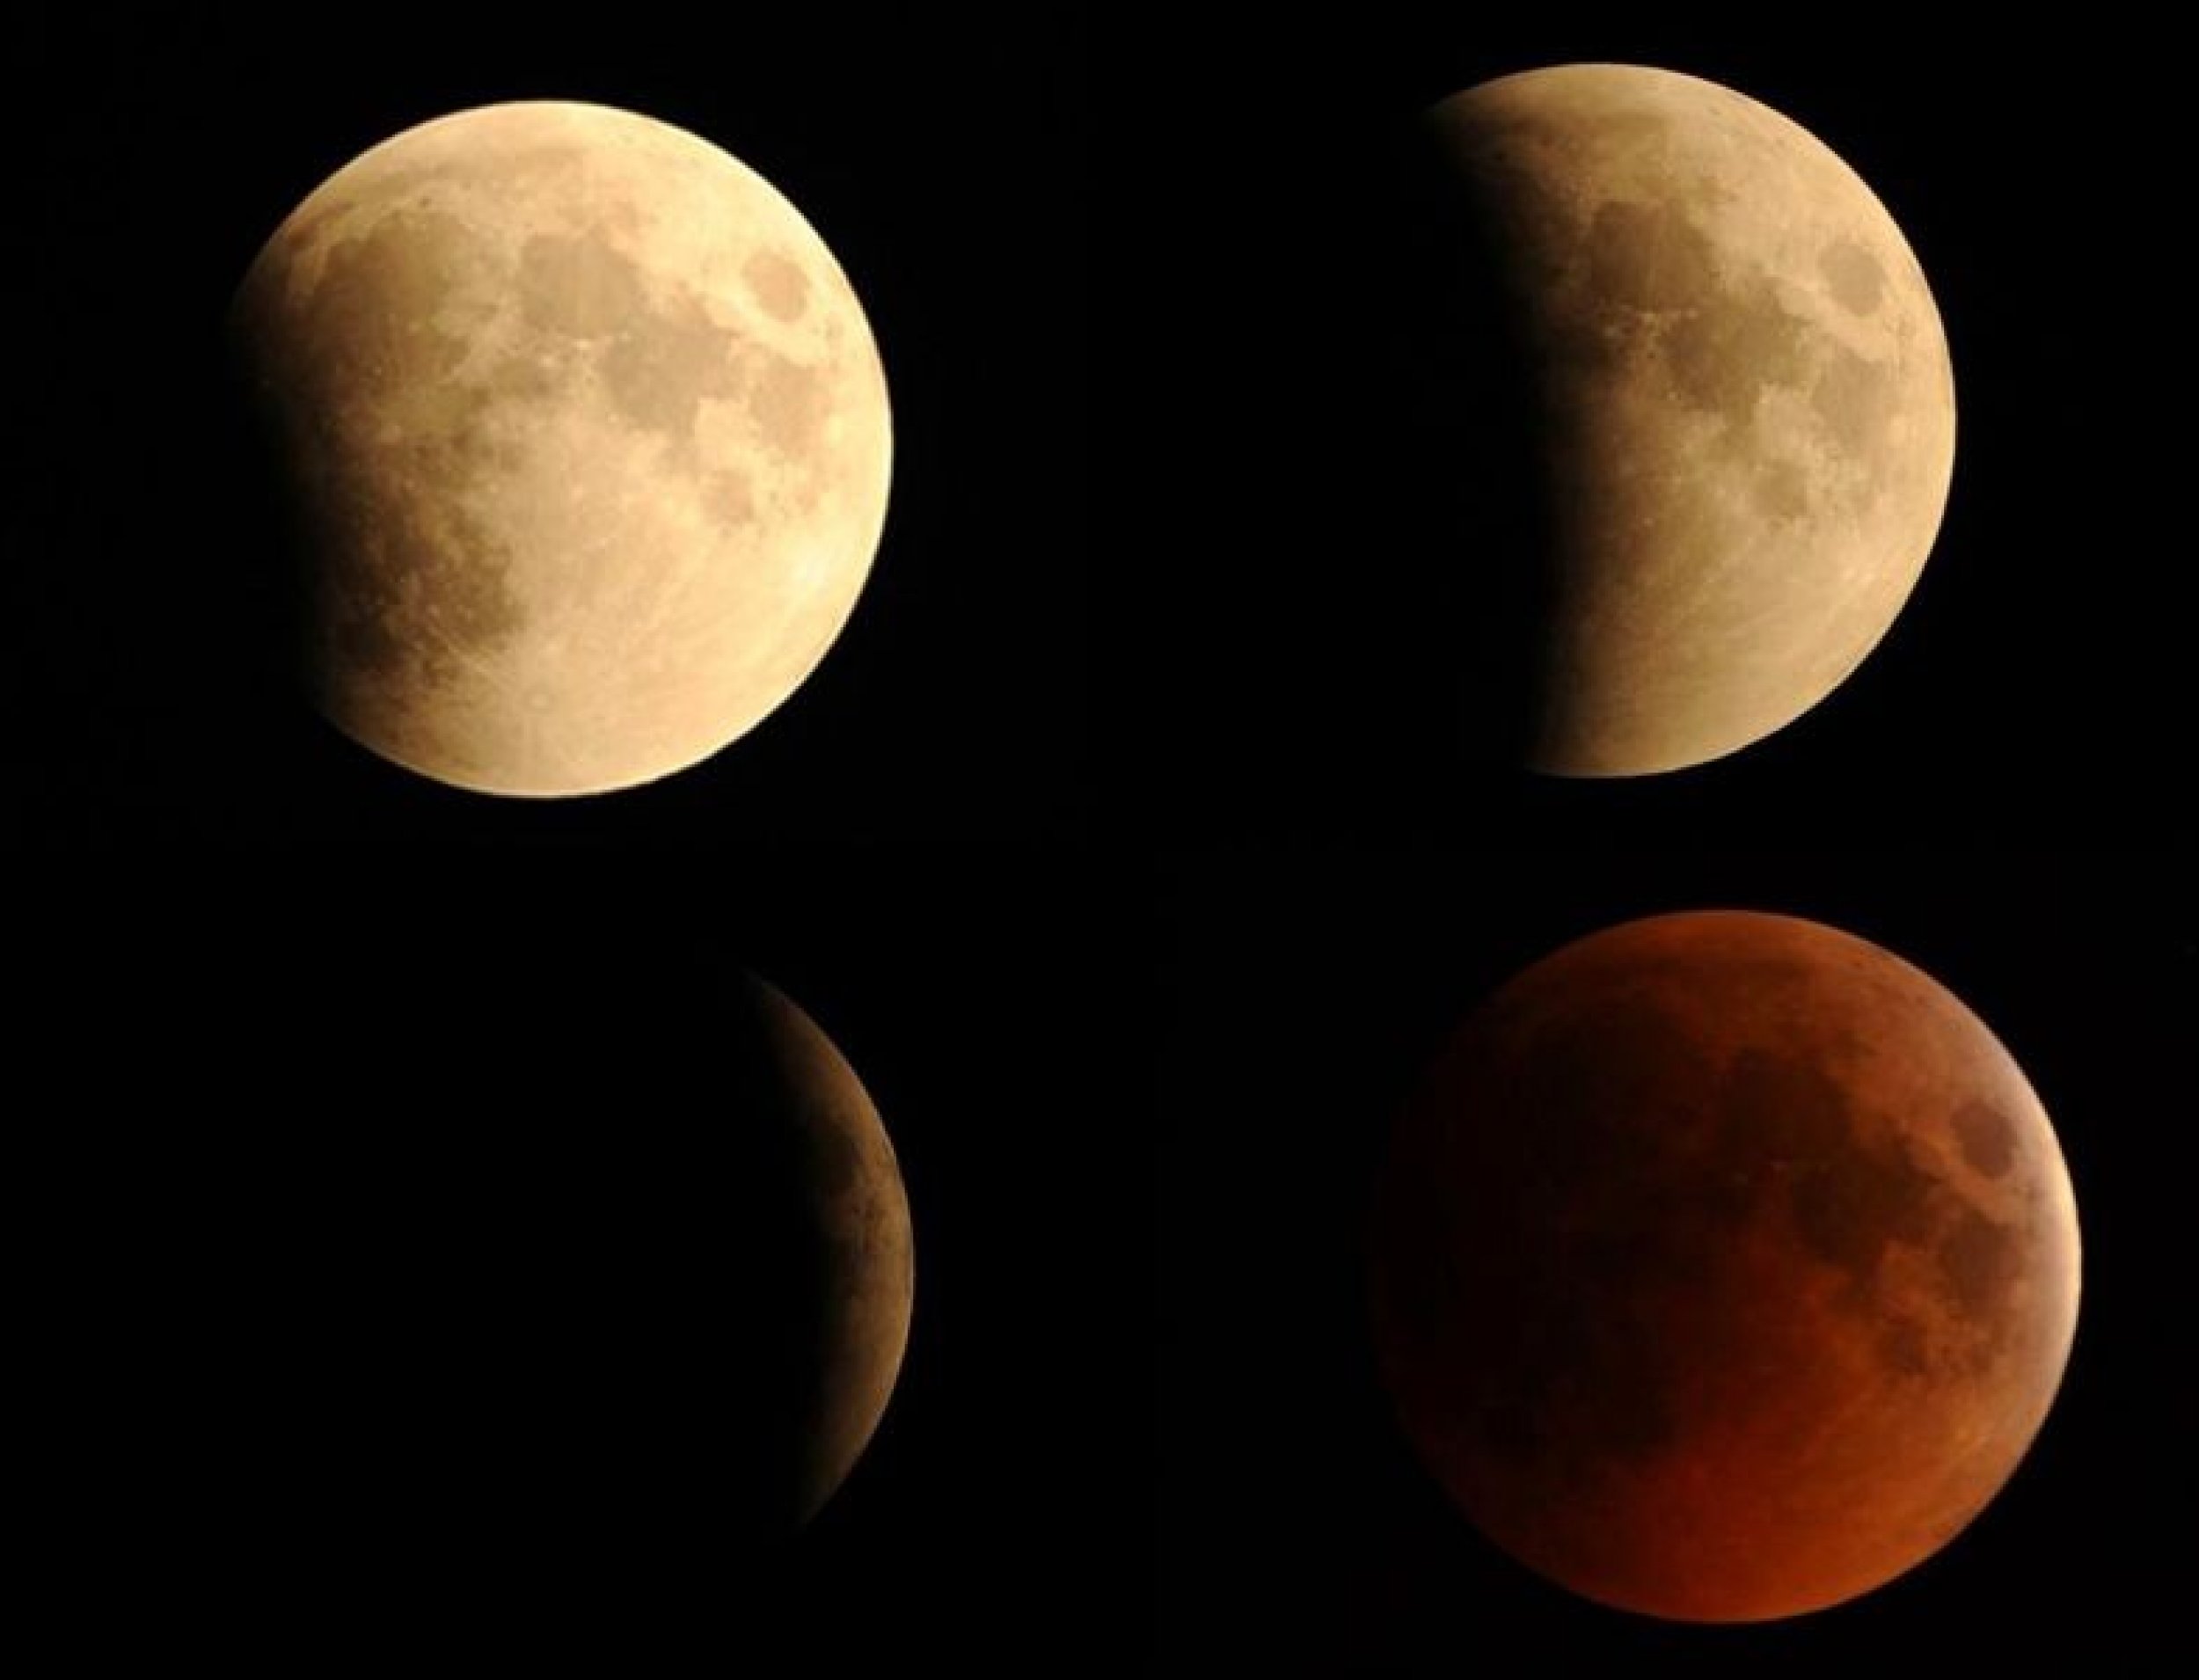 Lunar Eclipse on June 15 the most beautiful and historical blood moon stars worldwide PHOTOS